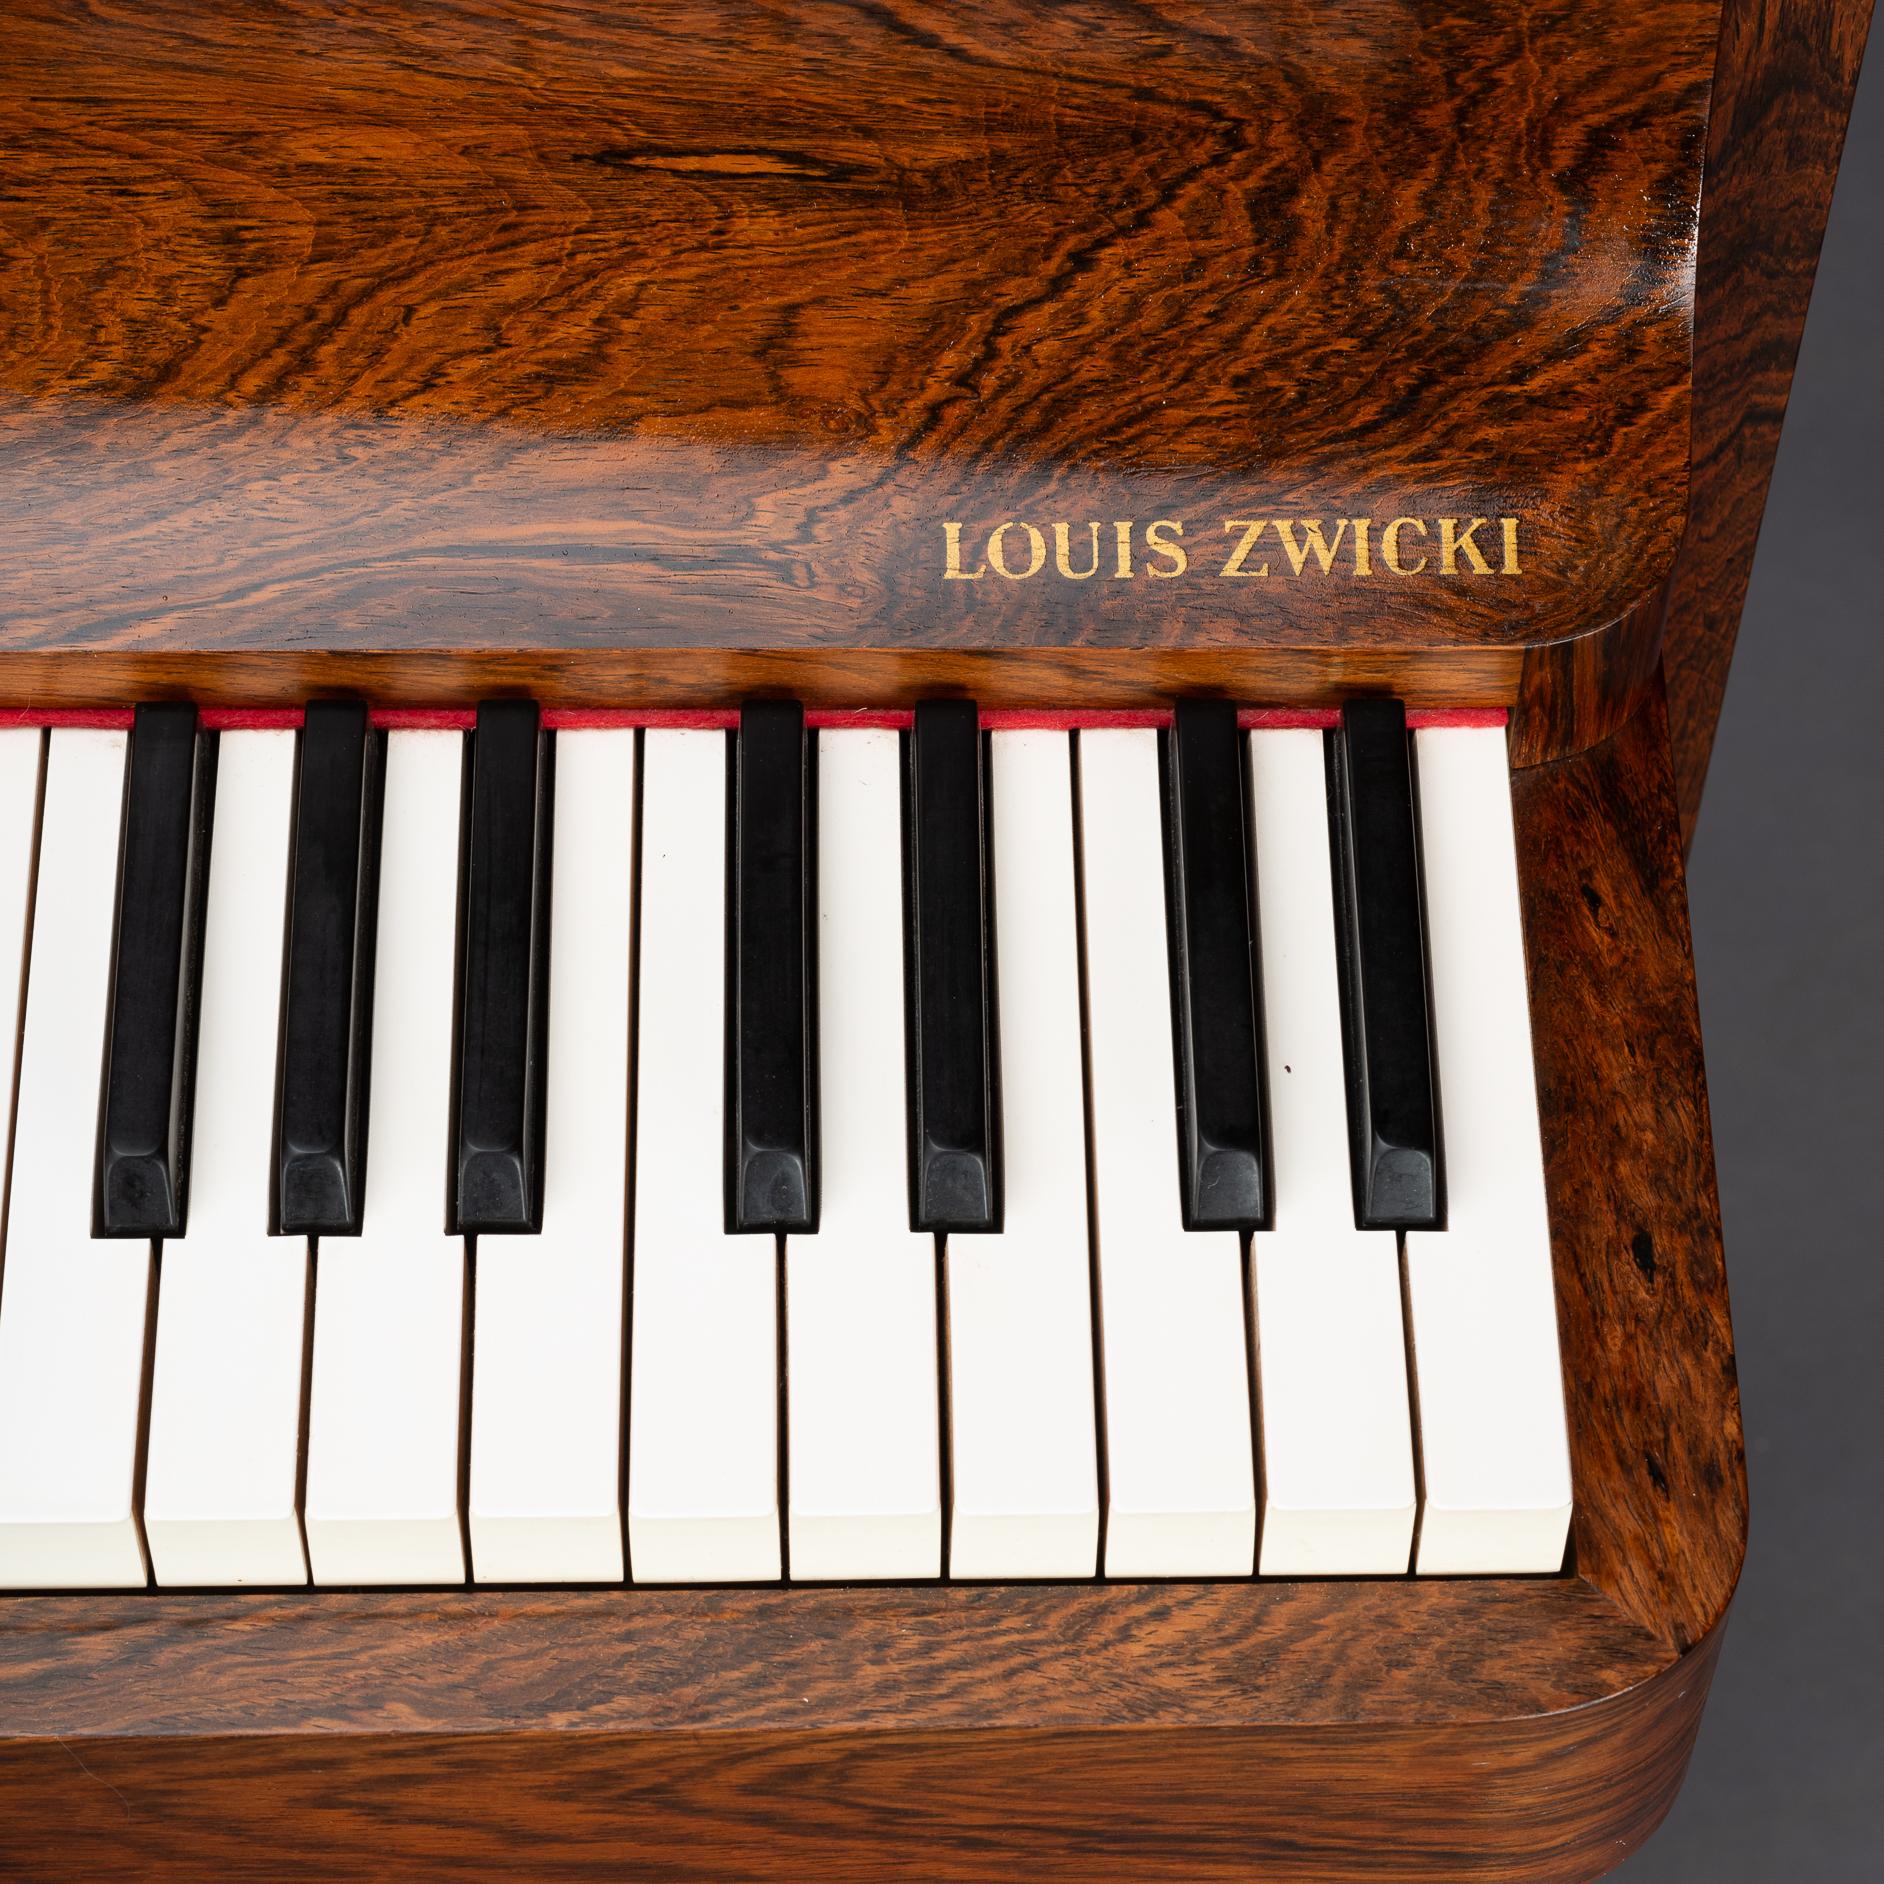 Danish Design Midcentury Rosewood Pianette by Louis Zwicki, 1950s For Sale 9